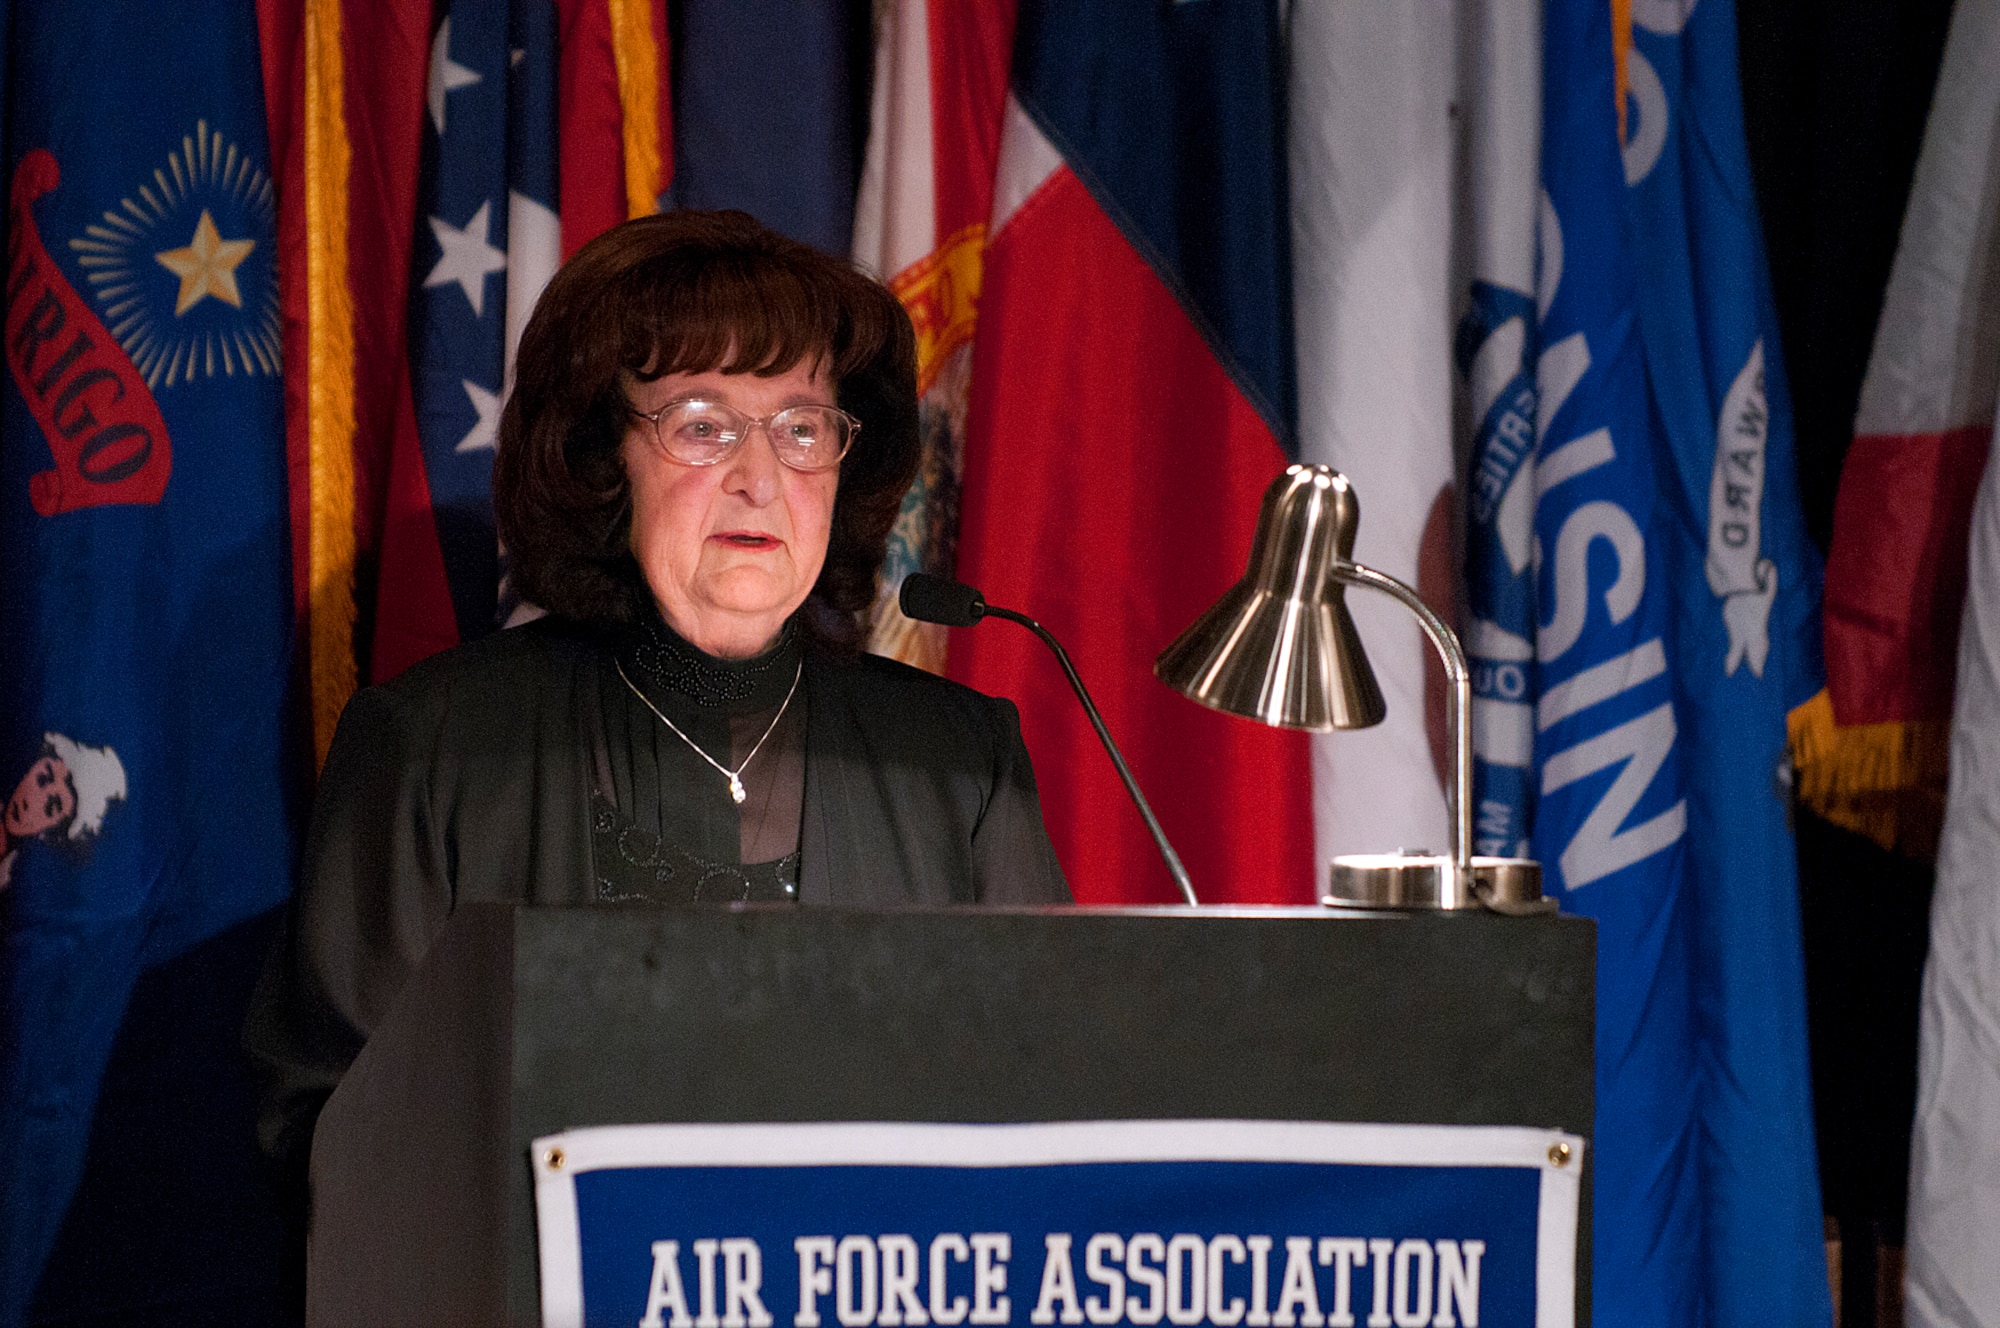 Irene Johnigan, Air Force Association Cheyenne Cowboy Chapter 357 president, addresses the AFA’s Armed Forces Day Banquet in the Cheyenne Holiday Inn May 18. (U.S. Air Force photo by R.J. Oriez)